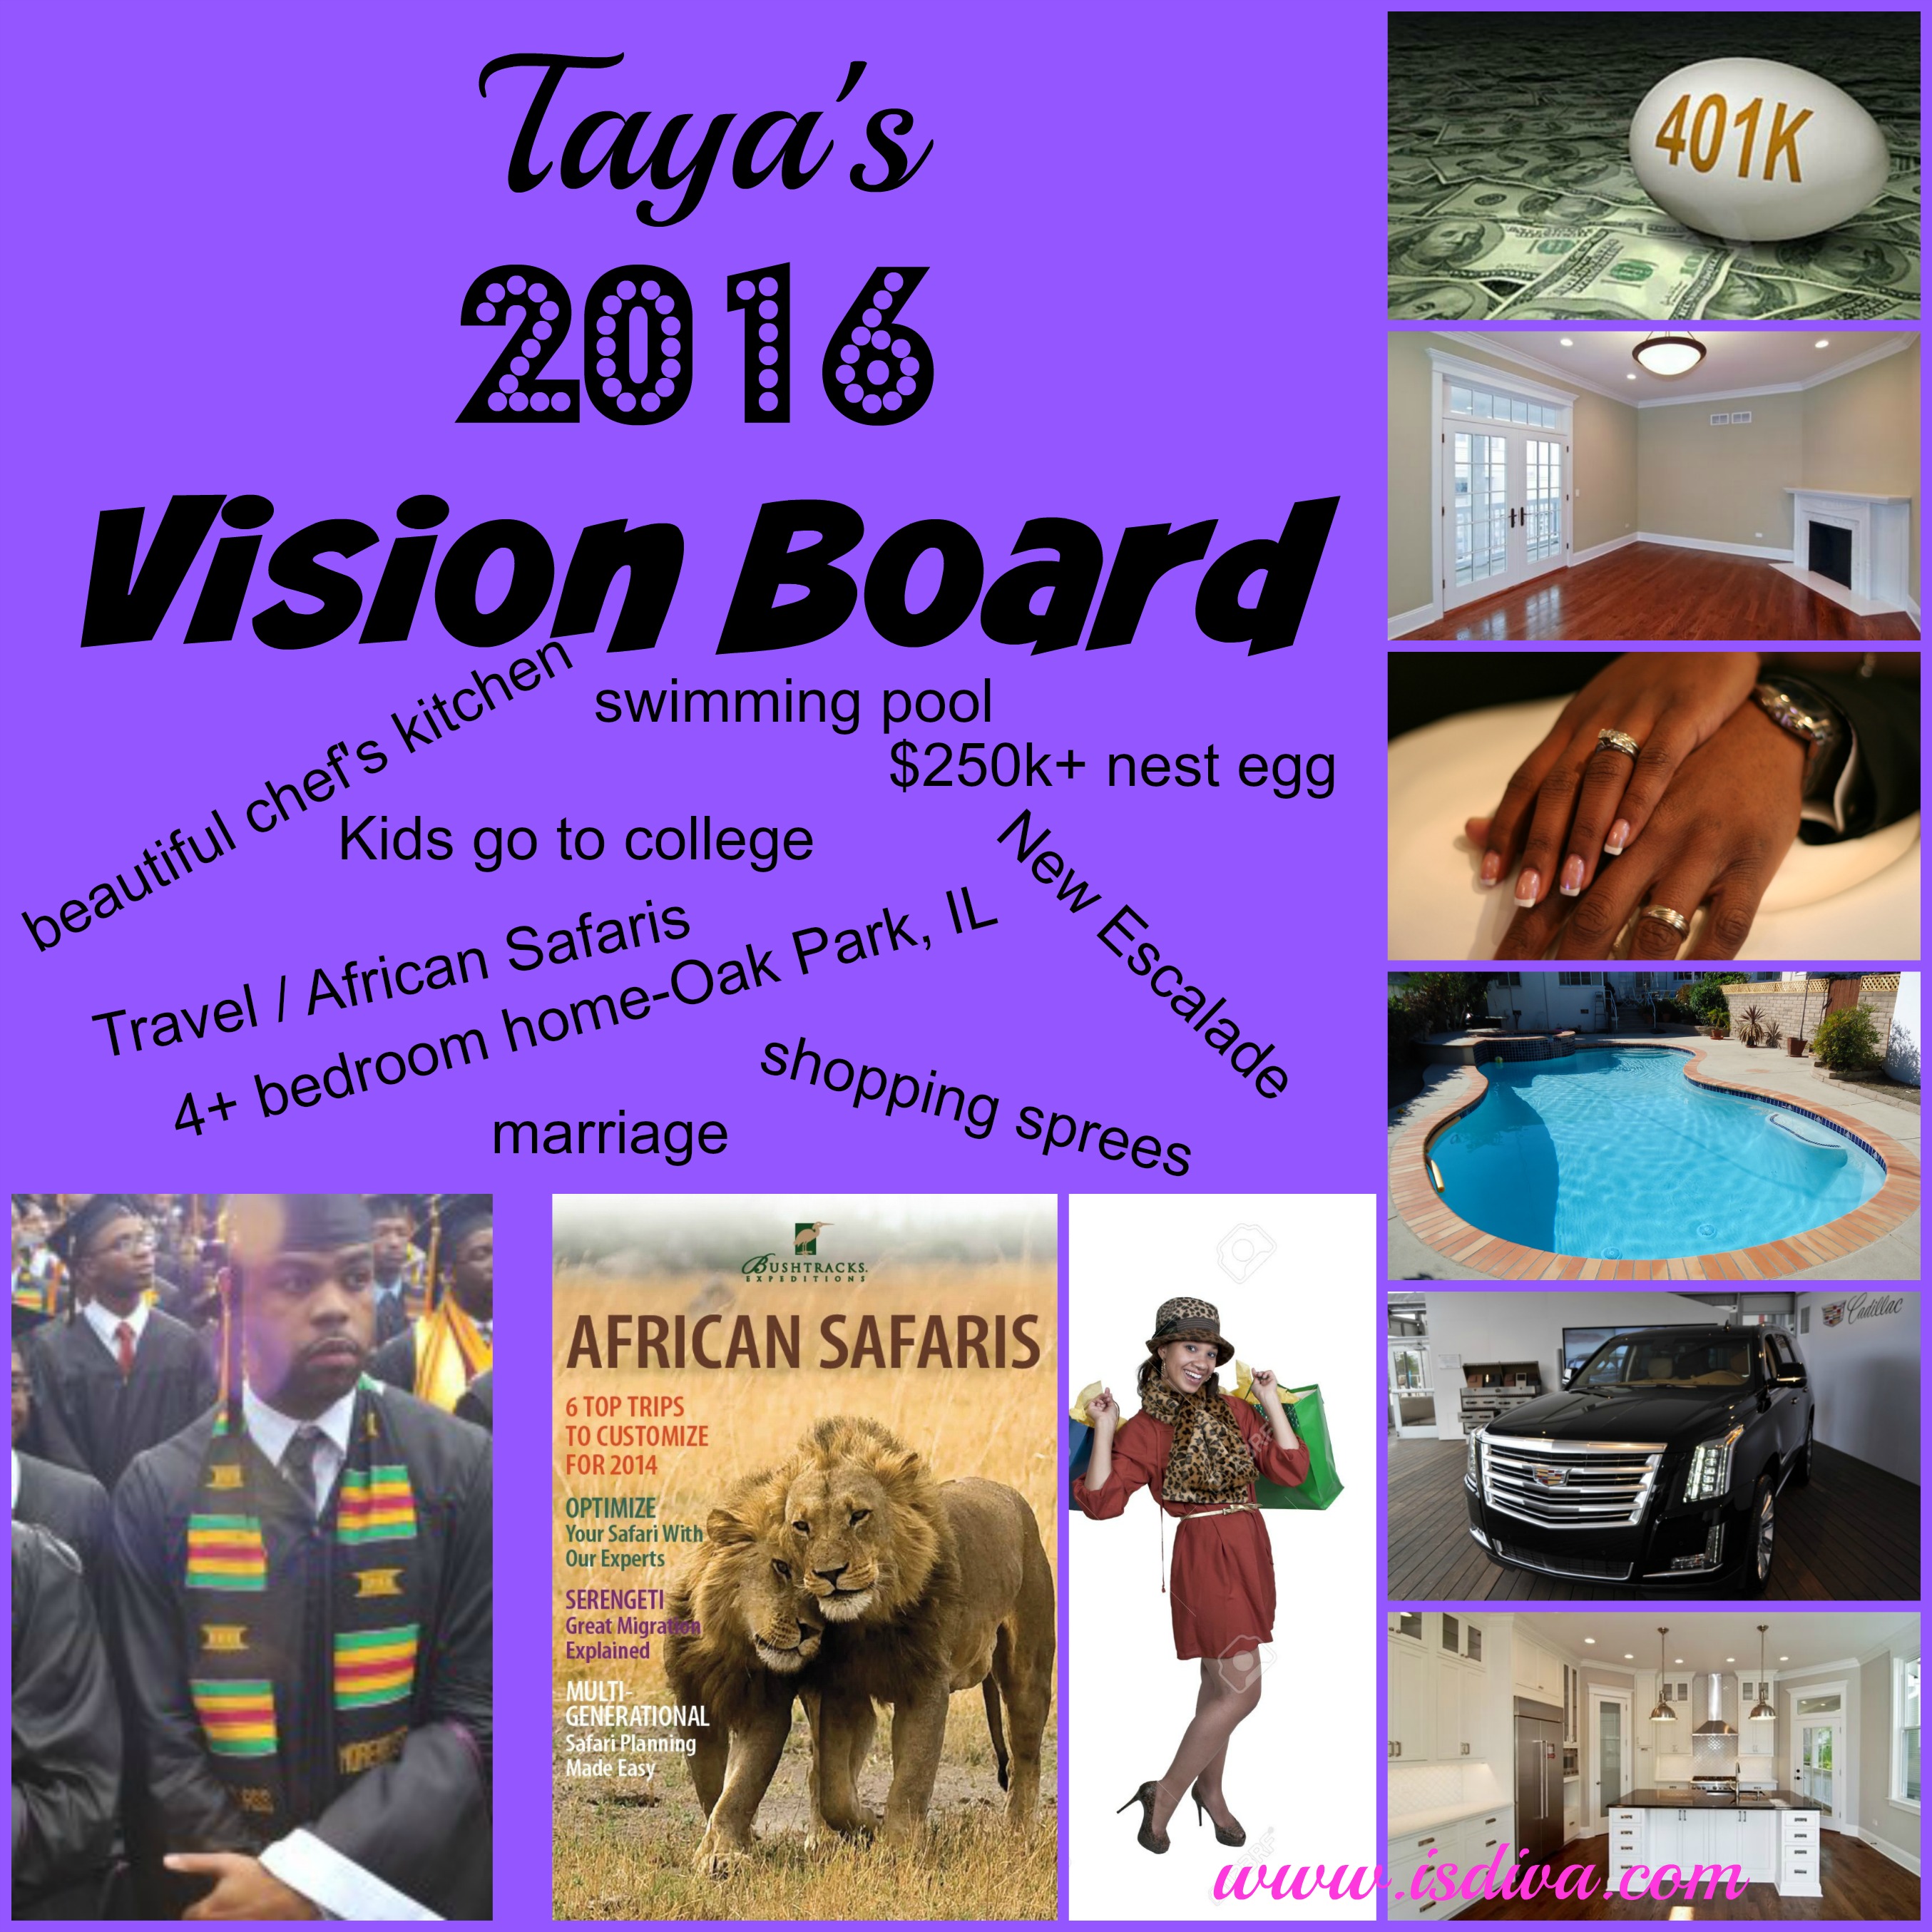 How to Create Your 2016 New Year’s Vision Board